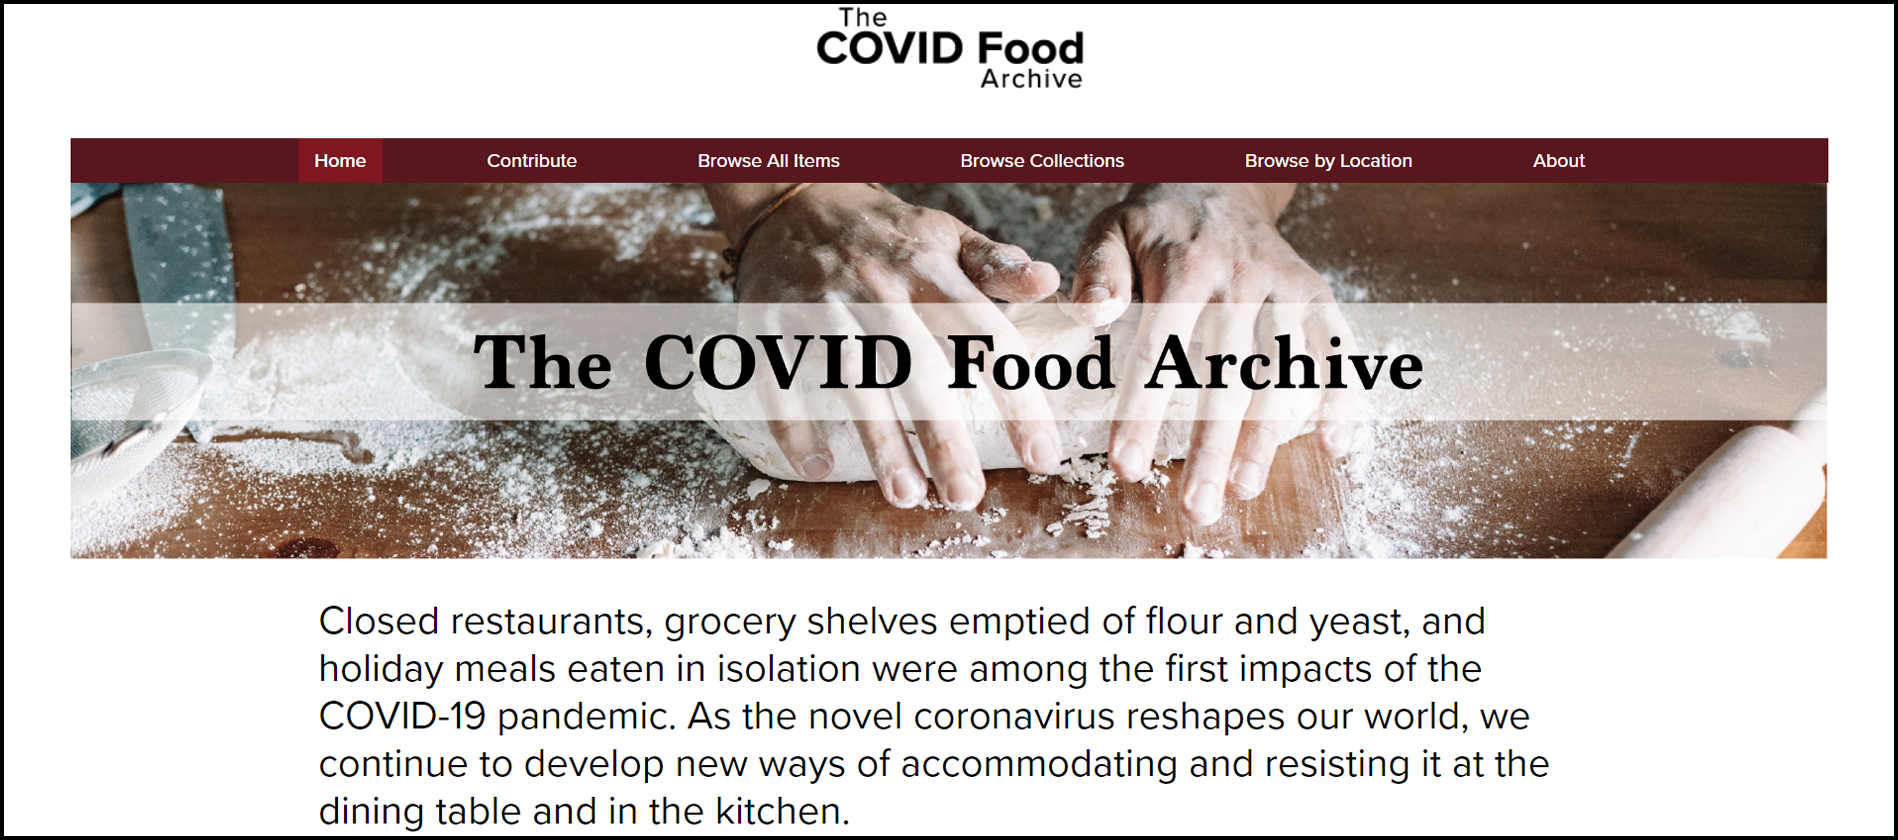 The COVID Food Archive home page, featuring a banner image of hands kneading dough.